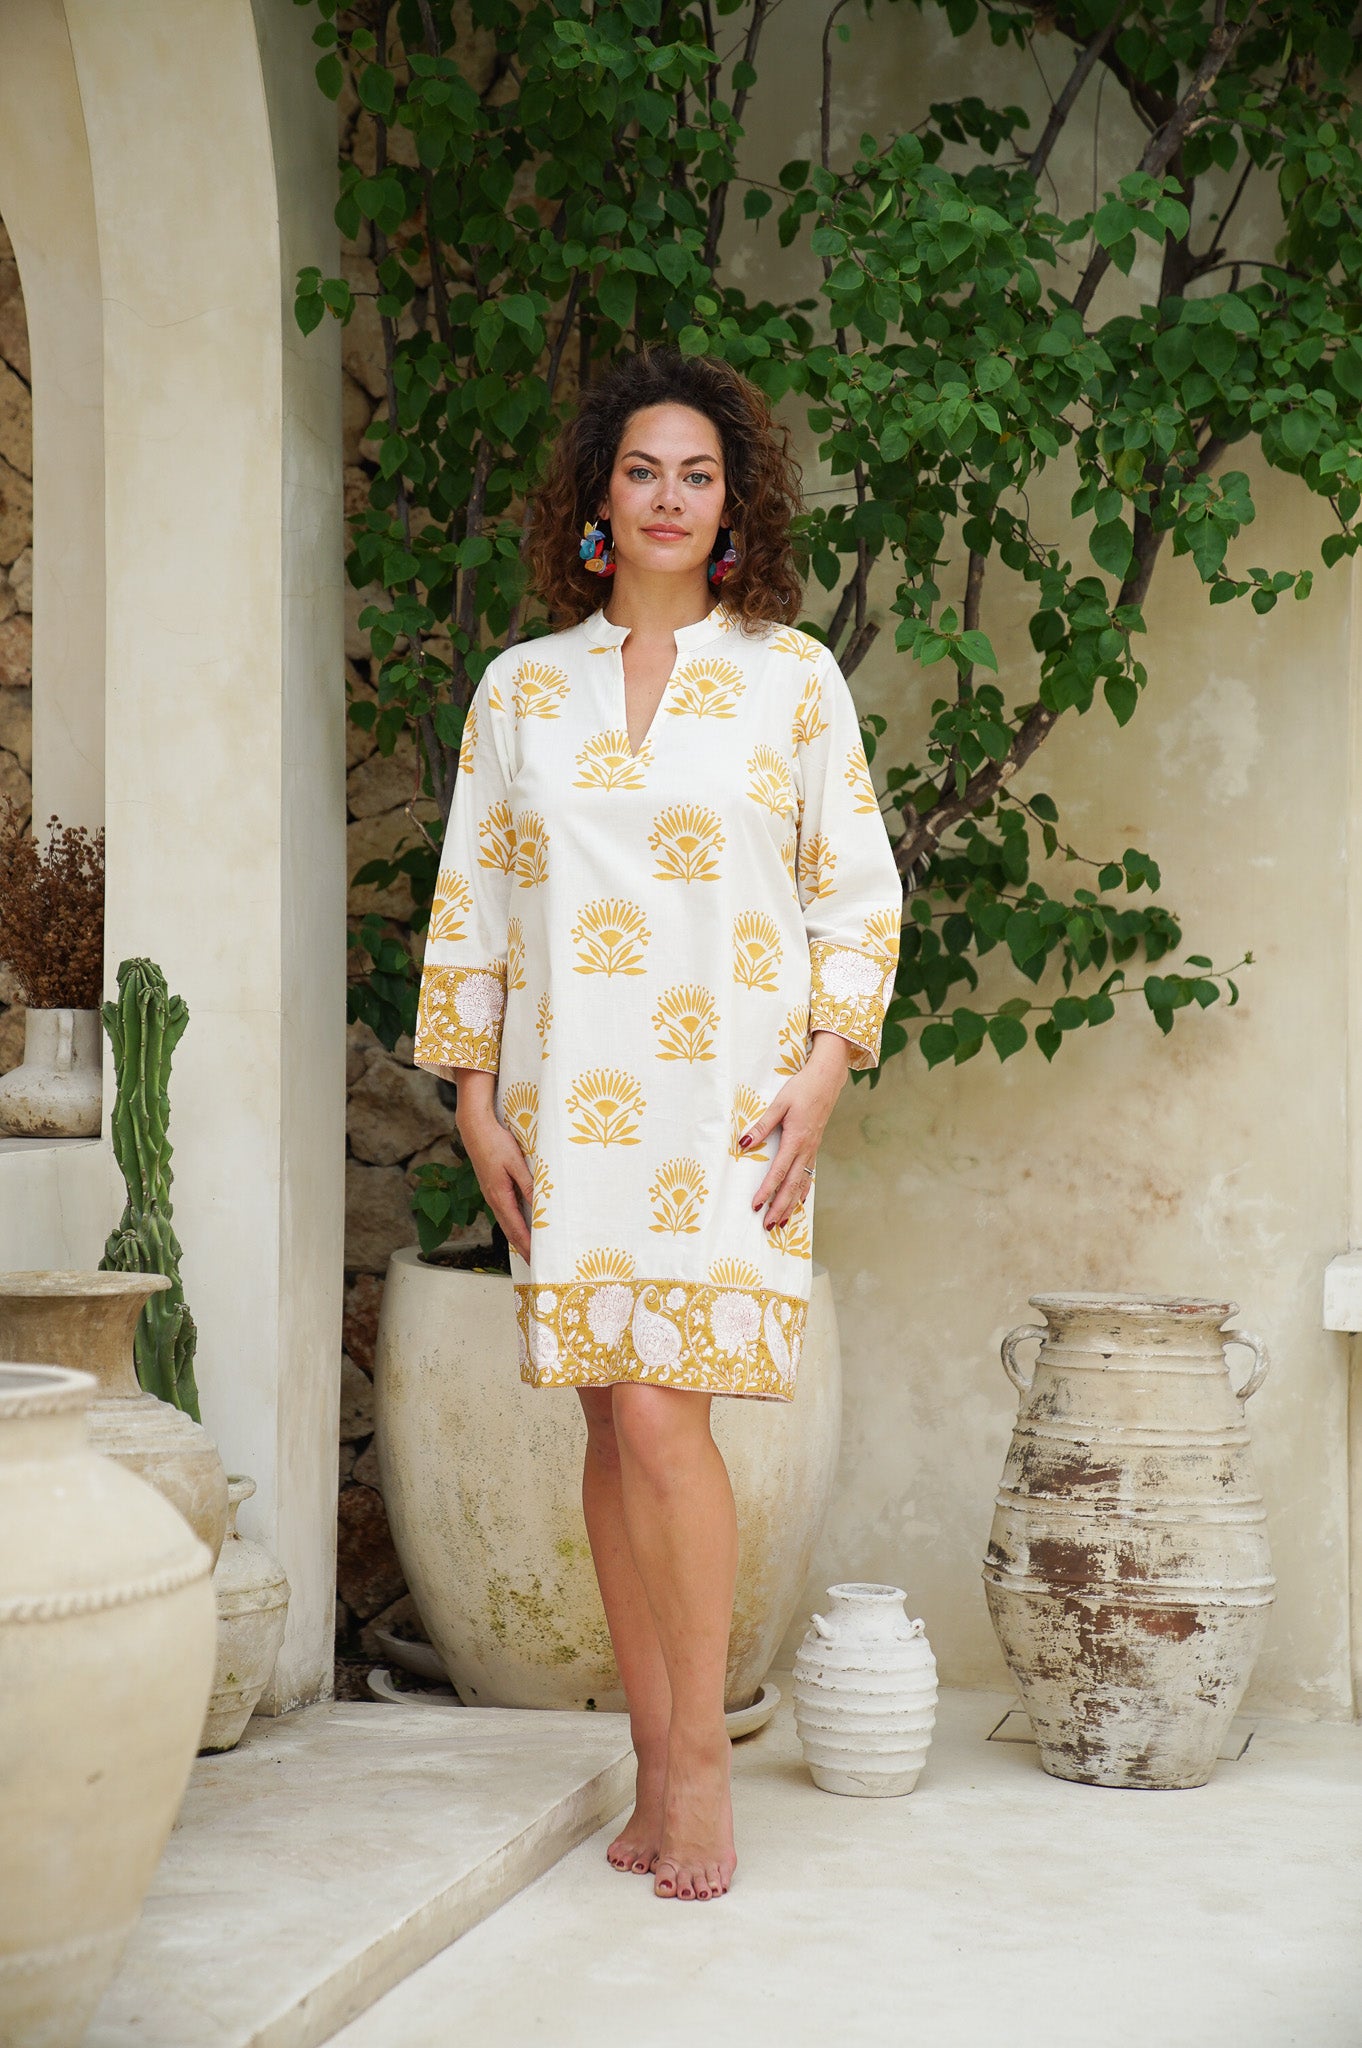 Step into sunshine with our yellow floral short dress. Effortless elegance awaits!